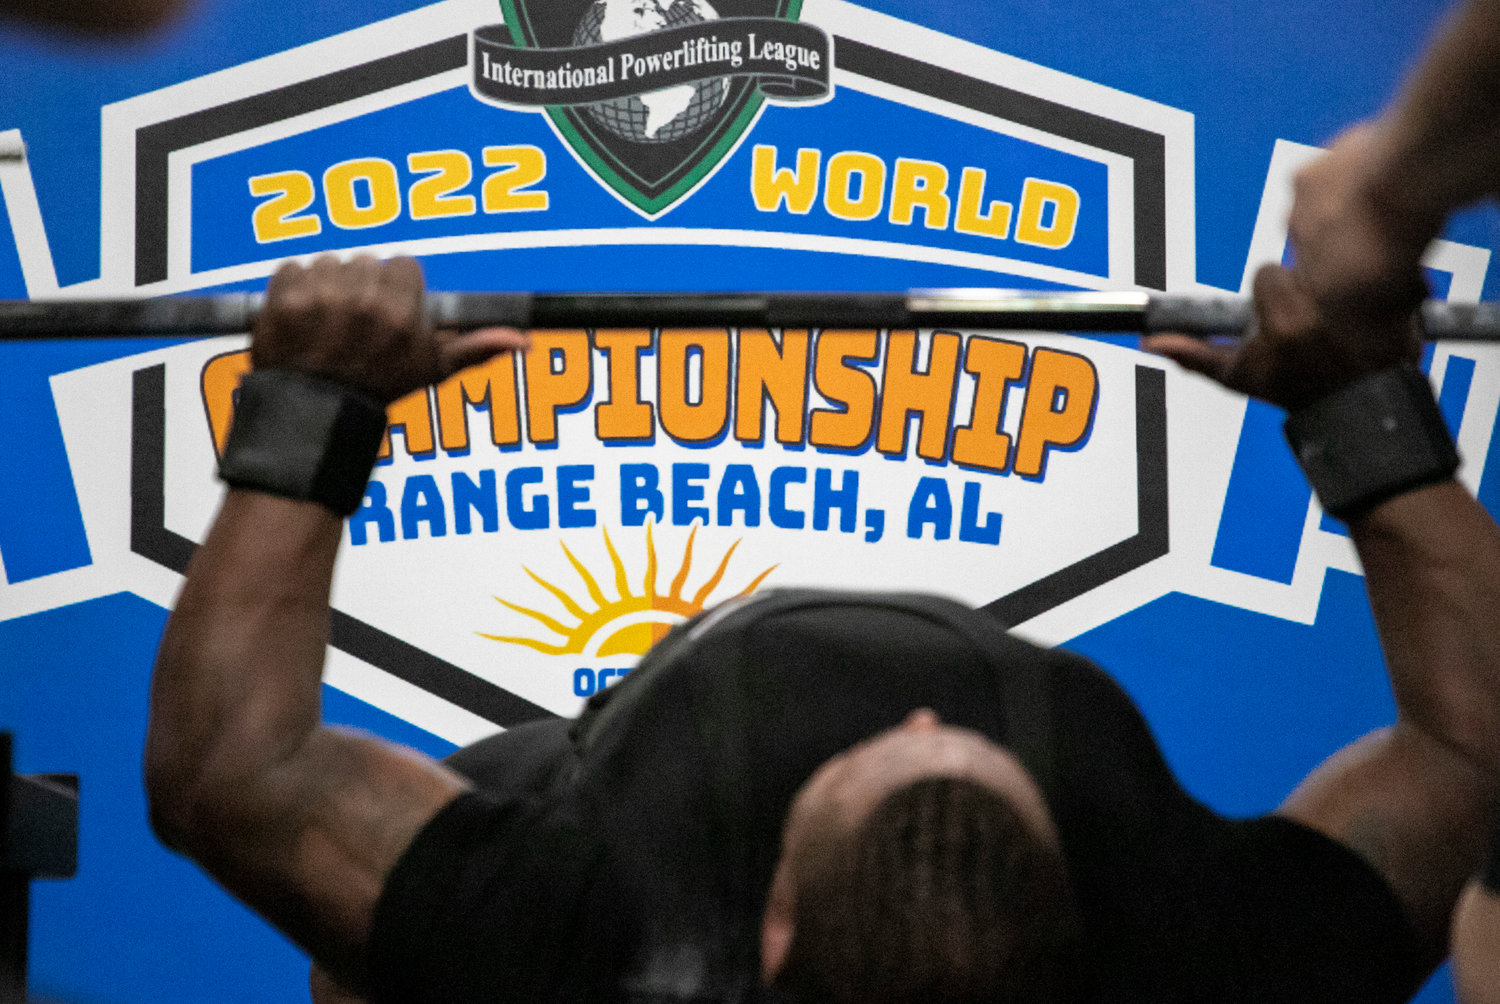 The Orange Beach Event Center was the new location of the International Powerlifting League’s World Championship meet after it was originally slated to be held in Russia last year. This year, the venue will once again turn into a powerlifting destination when the United States Powerlifting Association hosts the National Championships July 19-23.